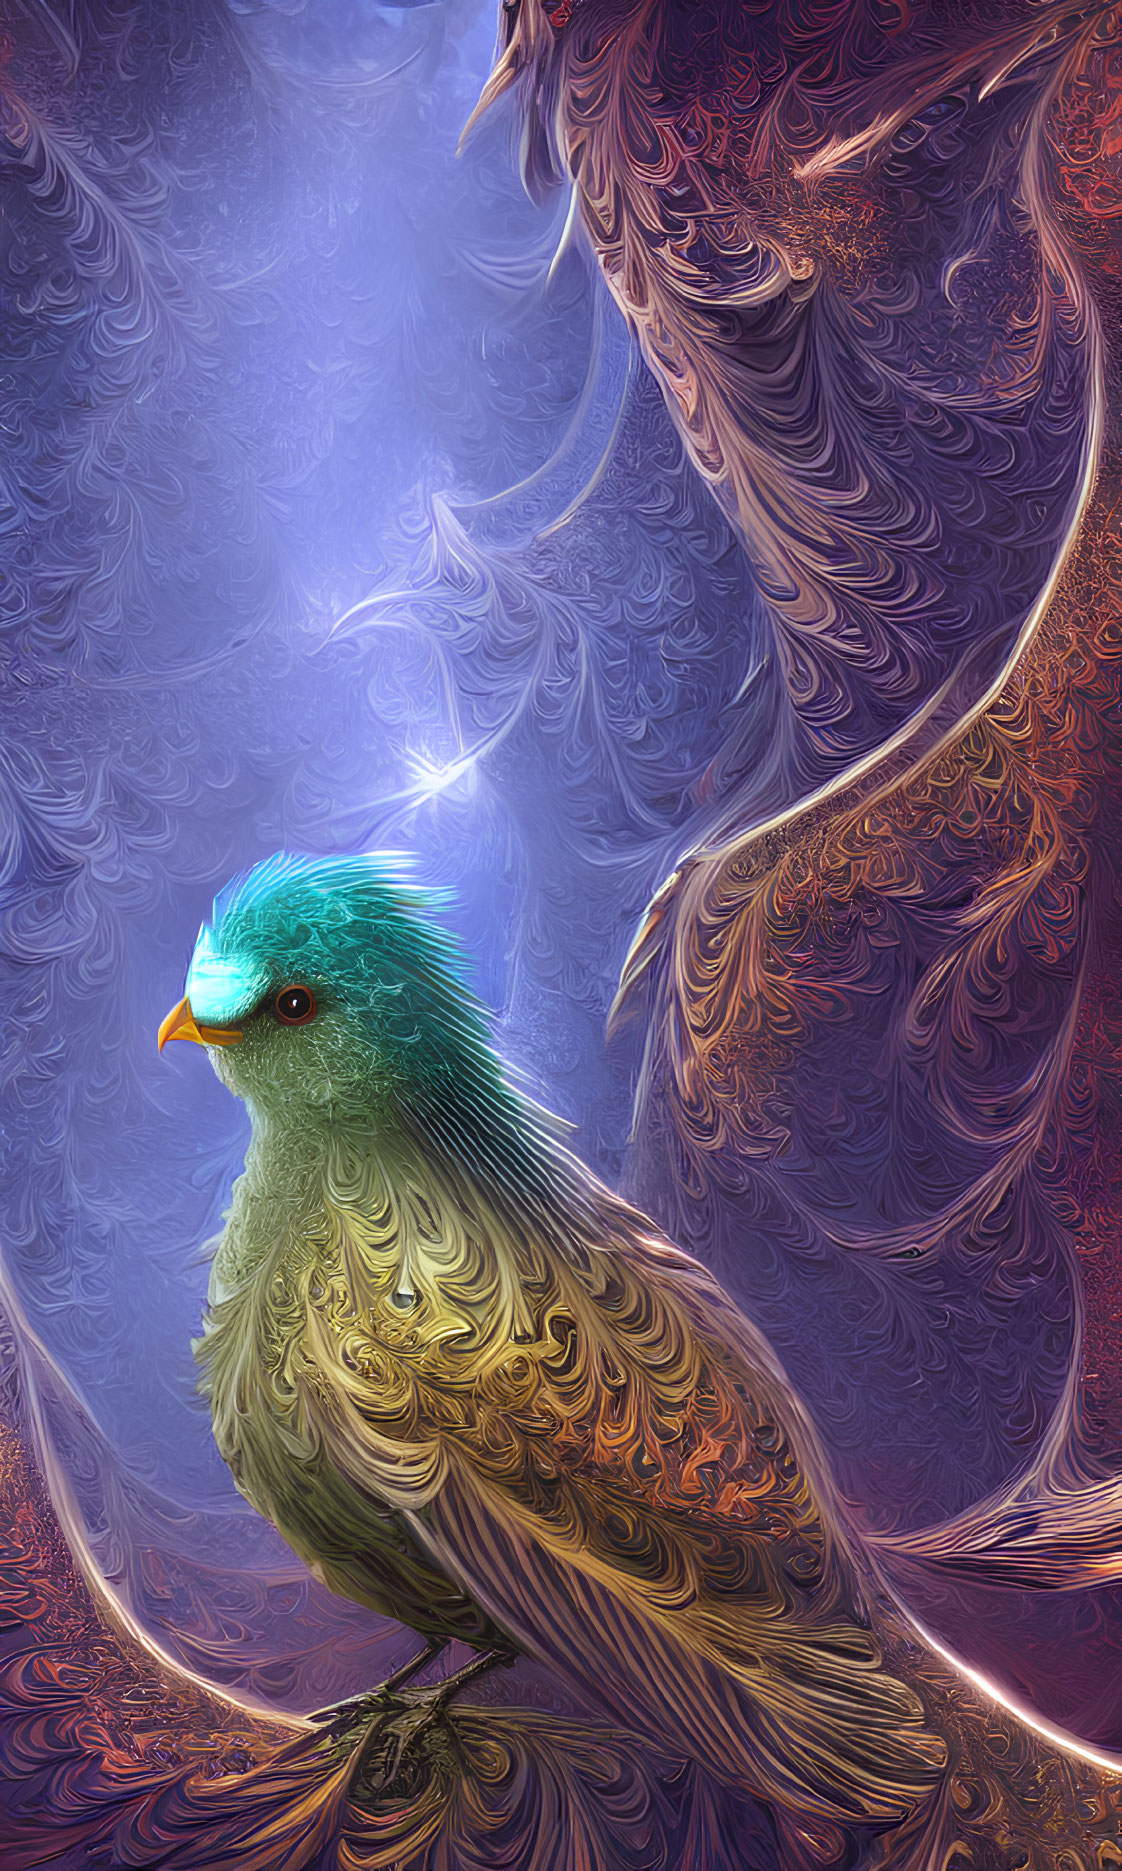 Colorful bird with intricate feathers on swirling blue and purple background